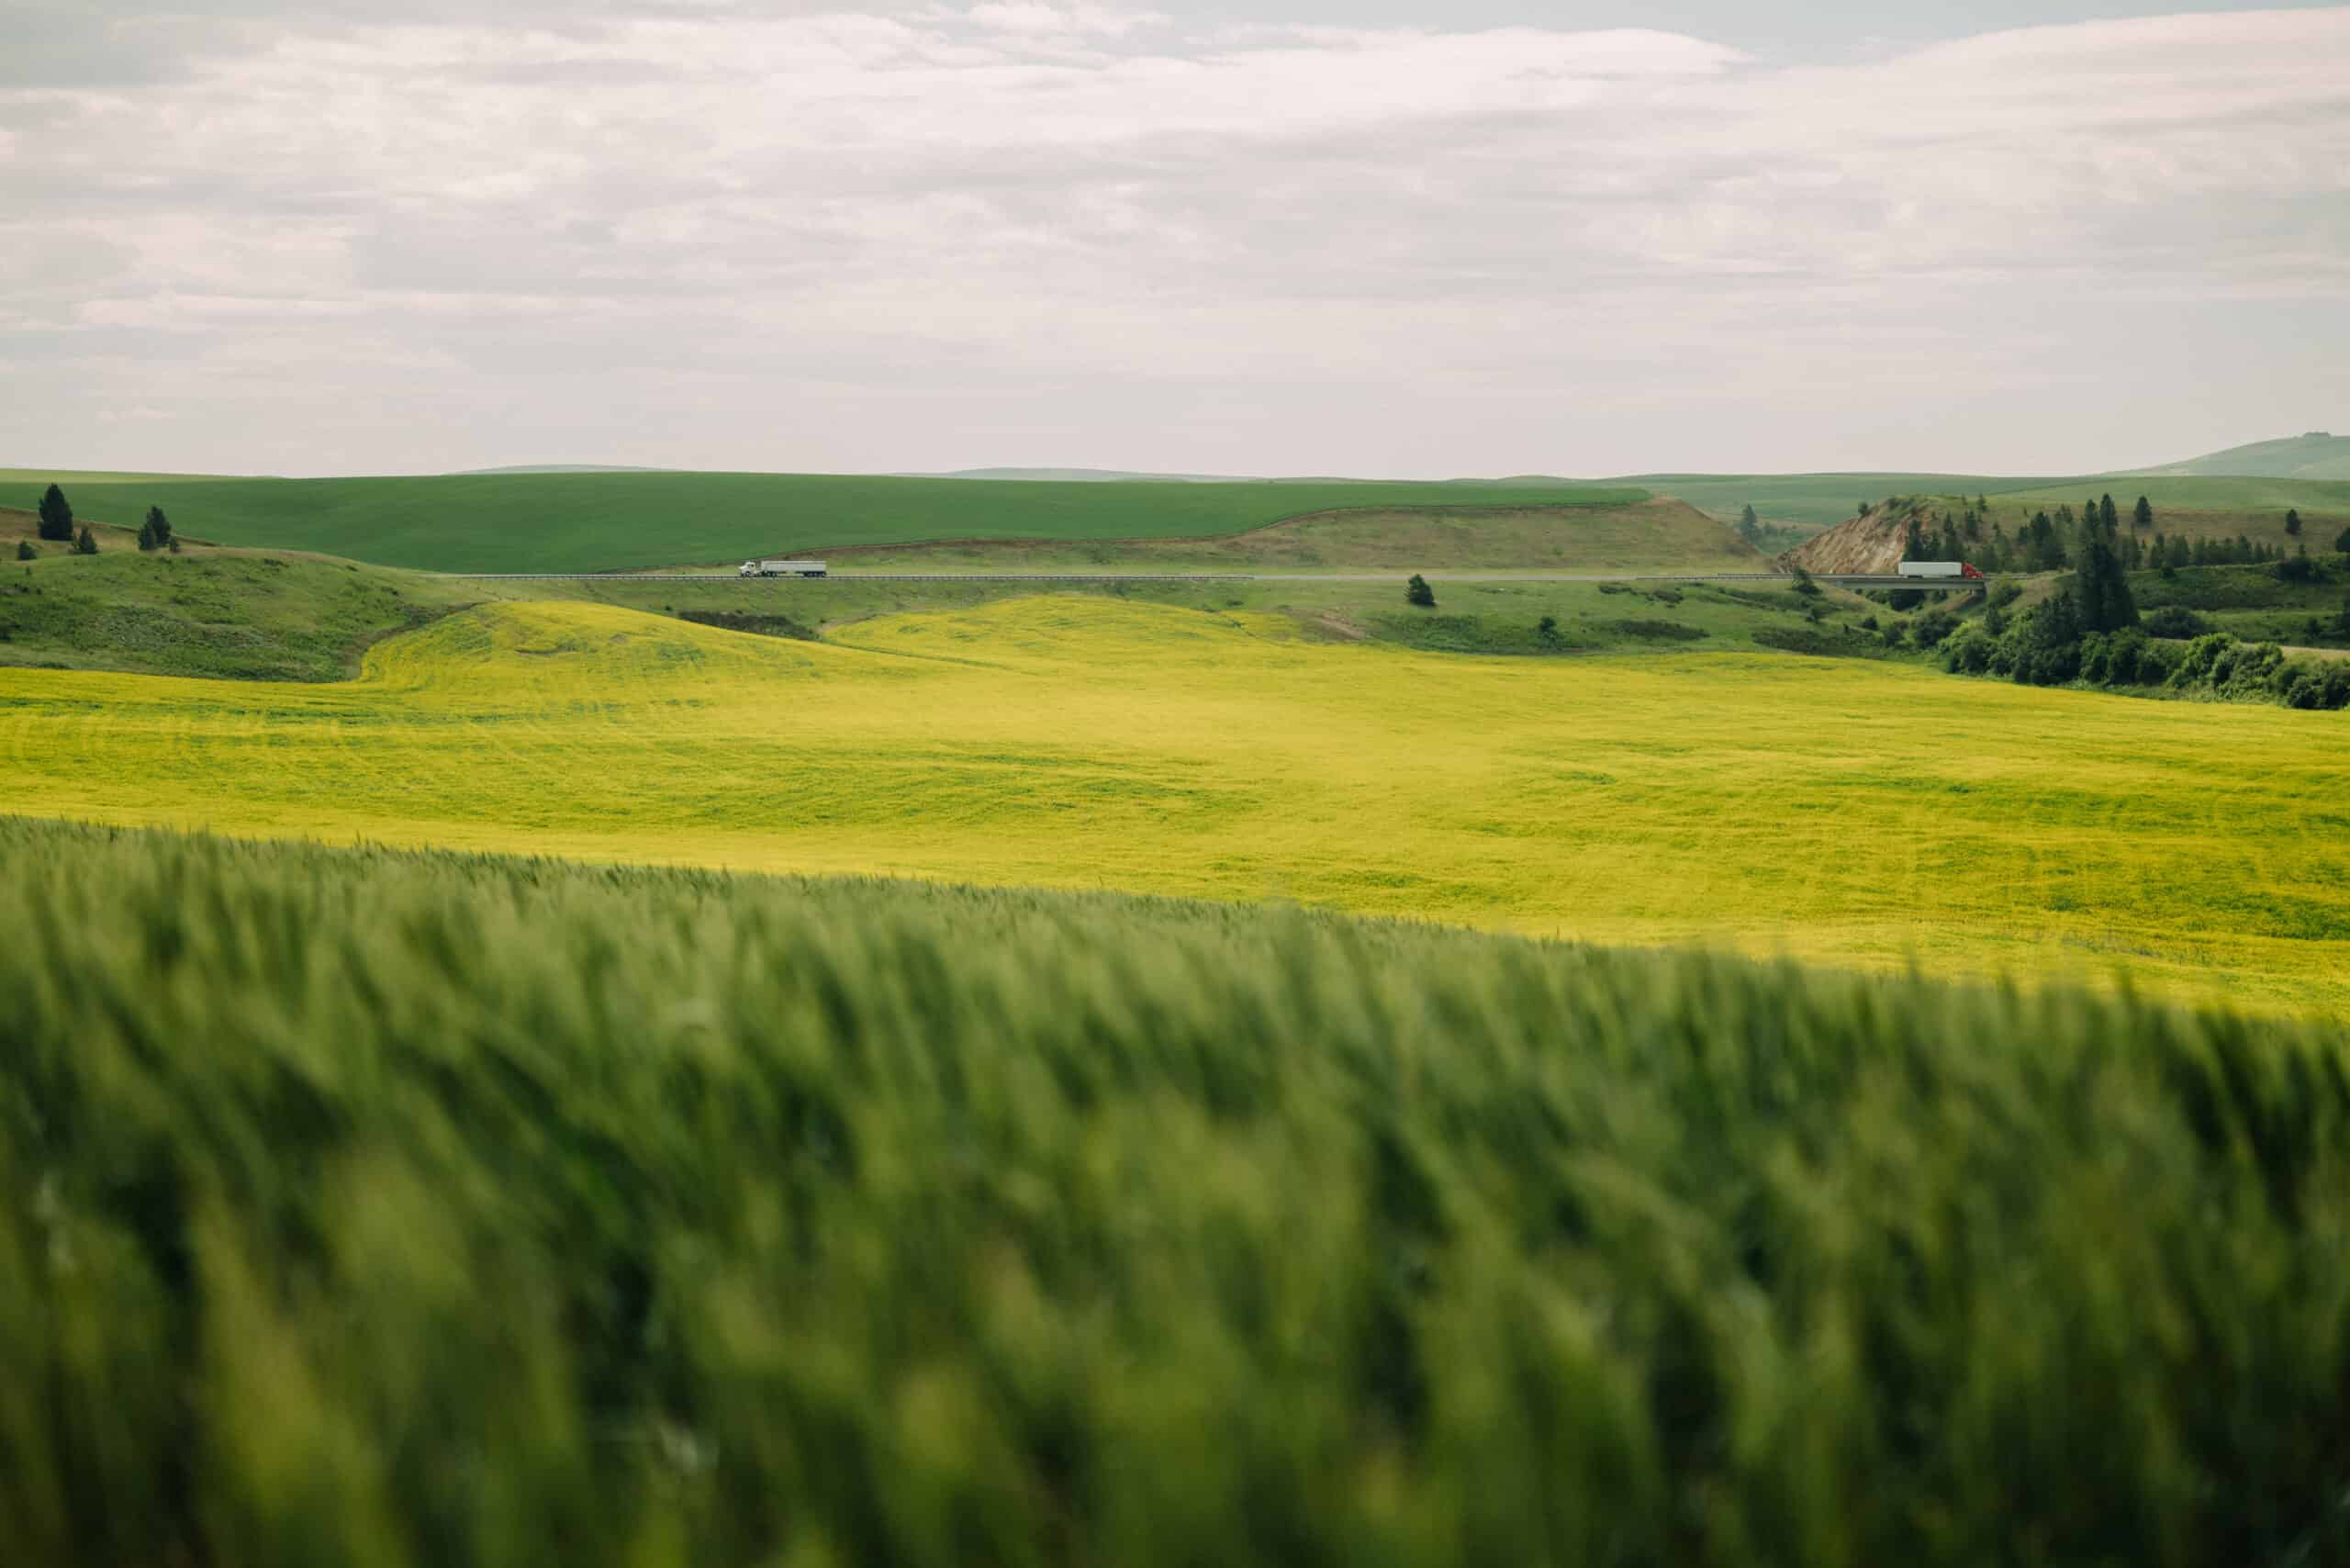 The Best Stops Along The Palouse Scenic Byway in Eastern Washington